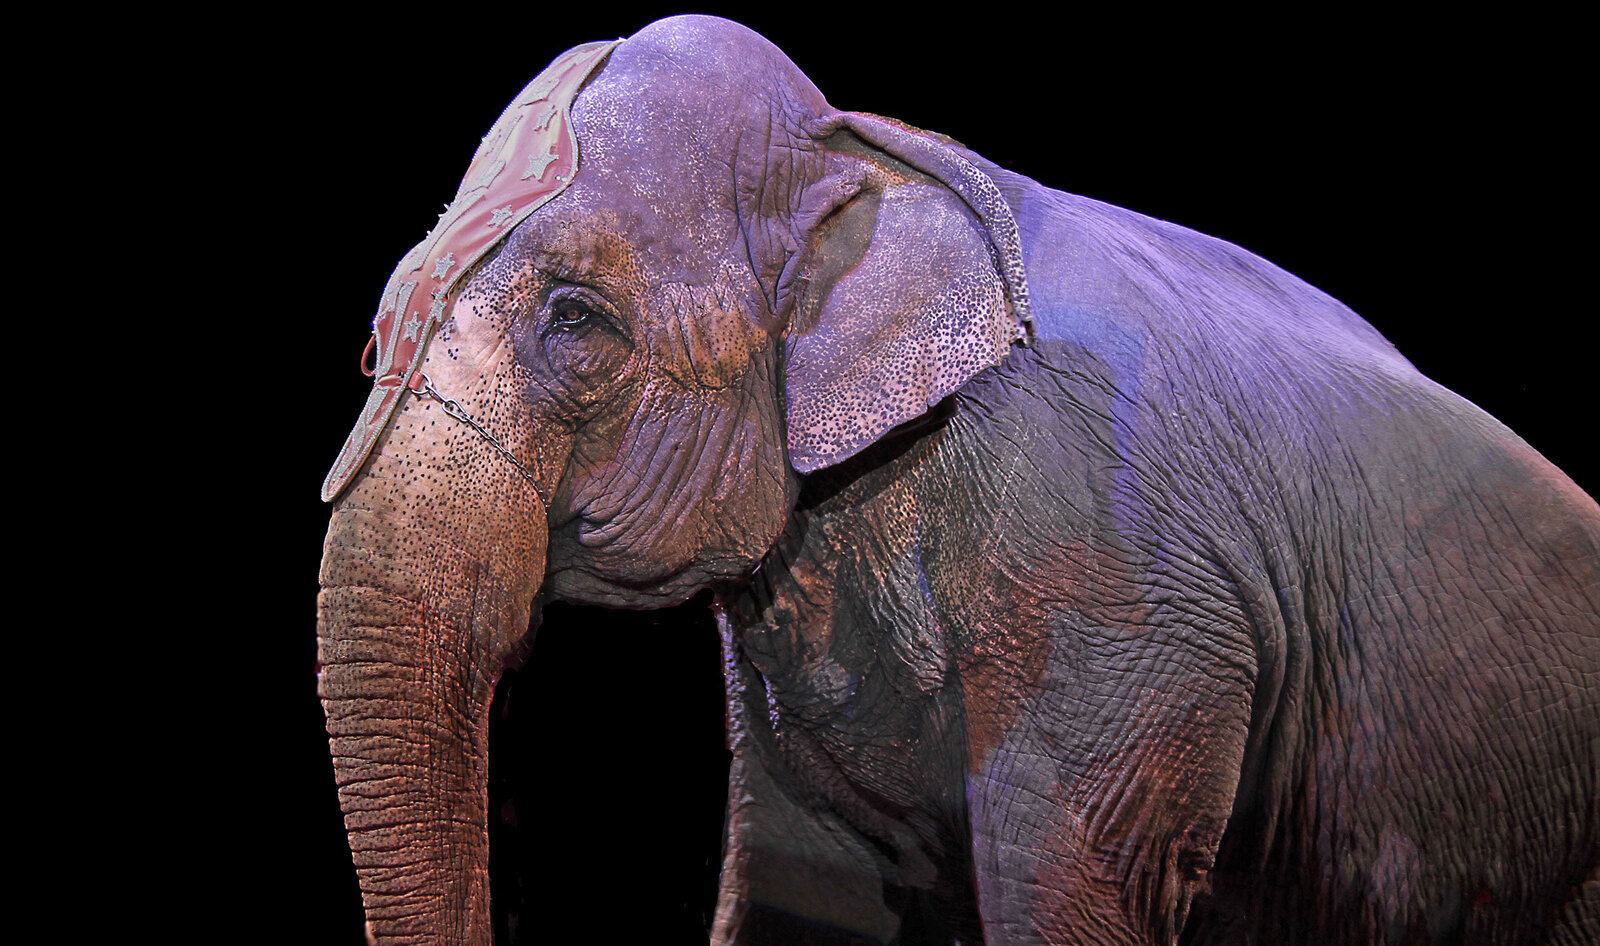 UK Finally Bans Wild Animal Circuses after 20 Years of Protests